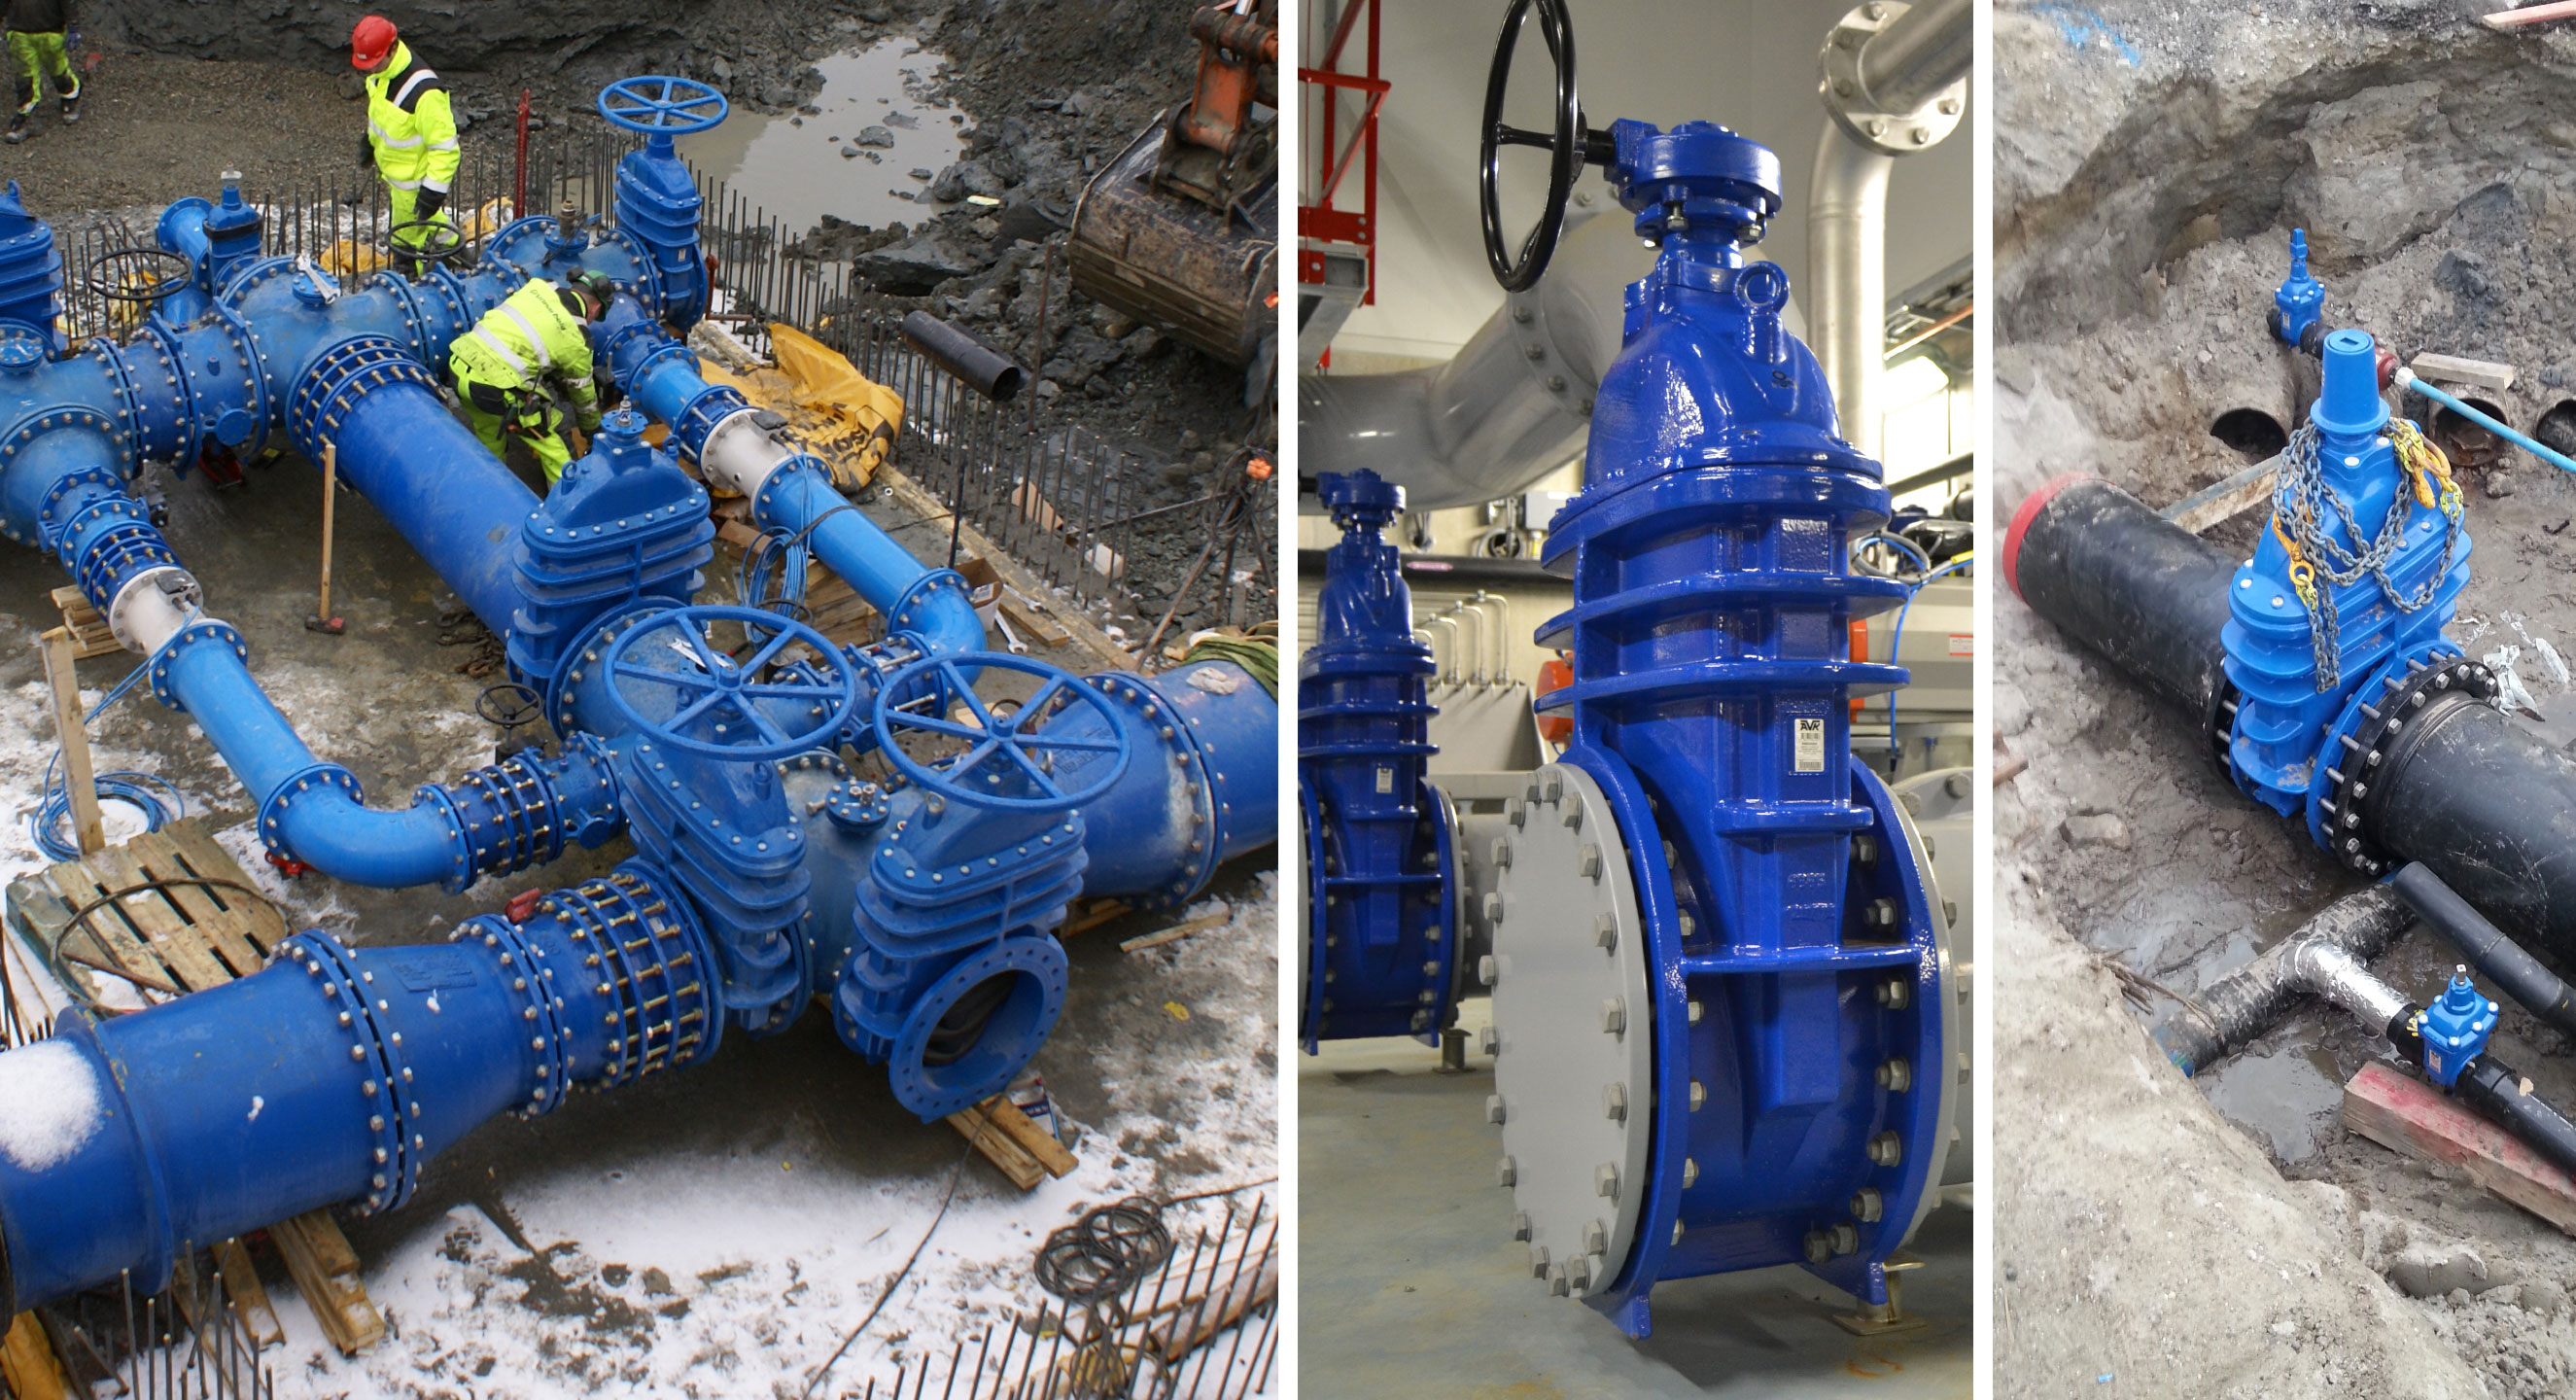 Gate valves installed in different places